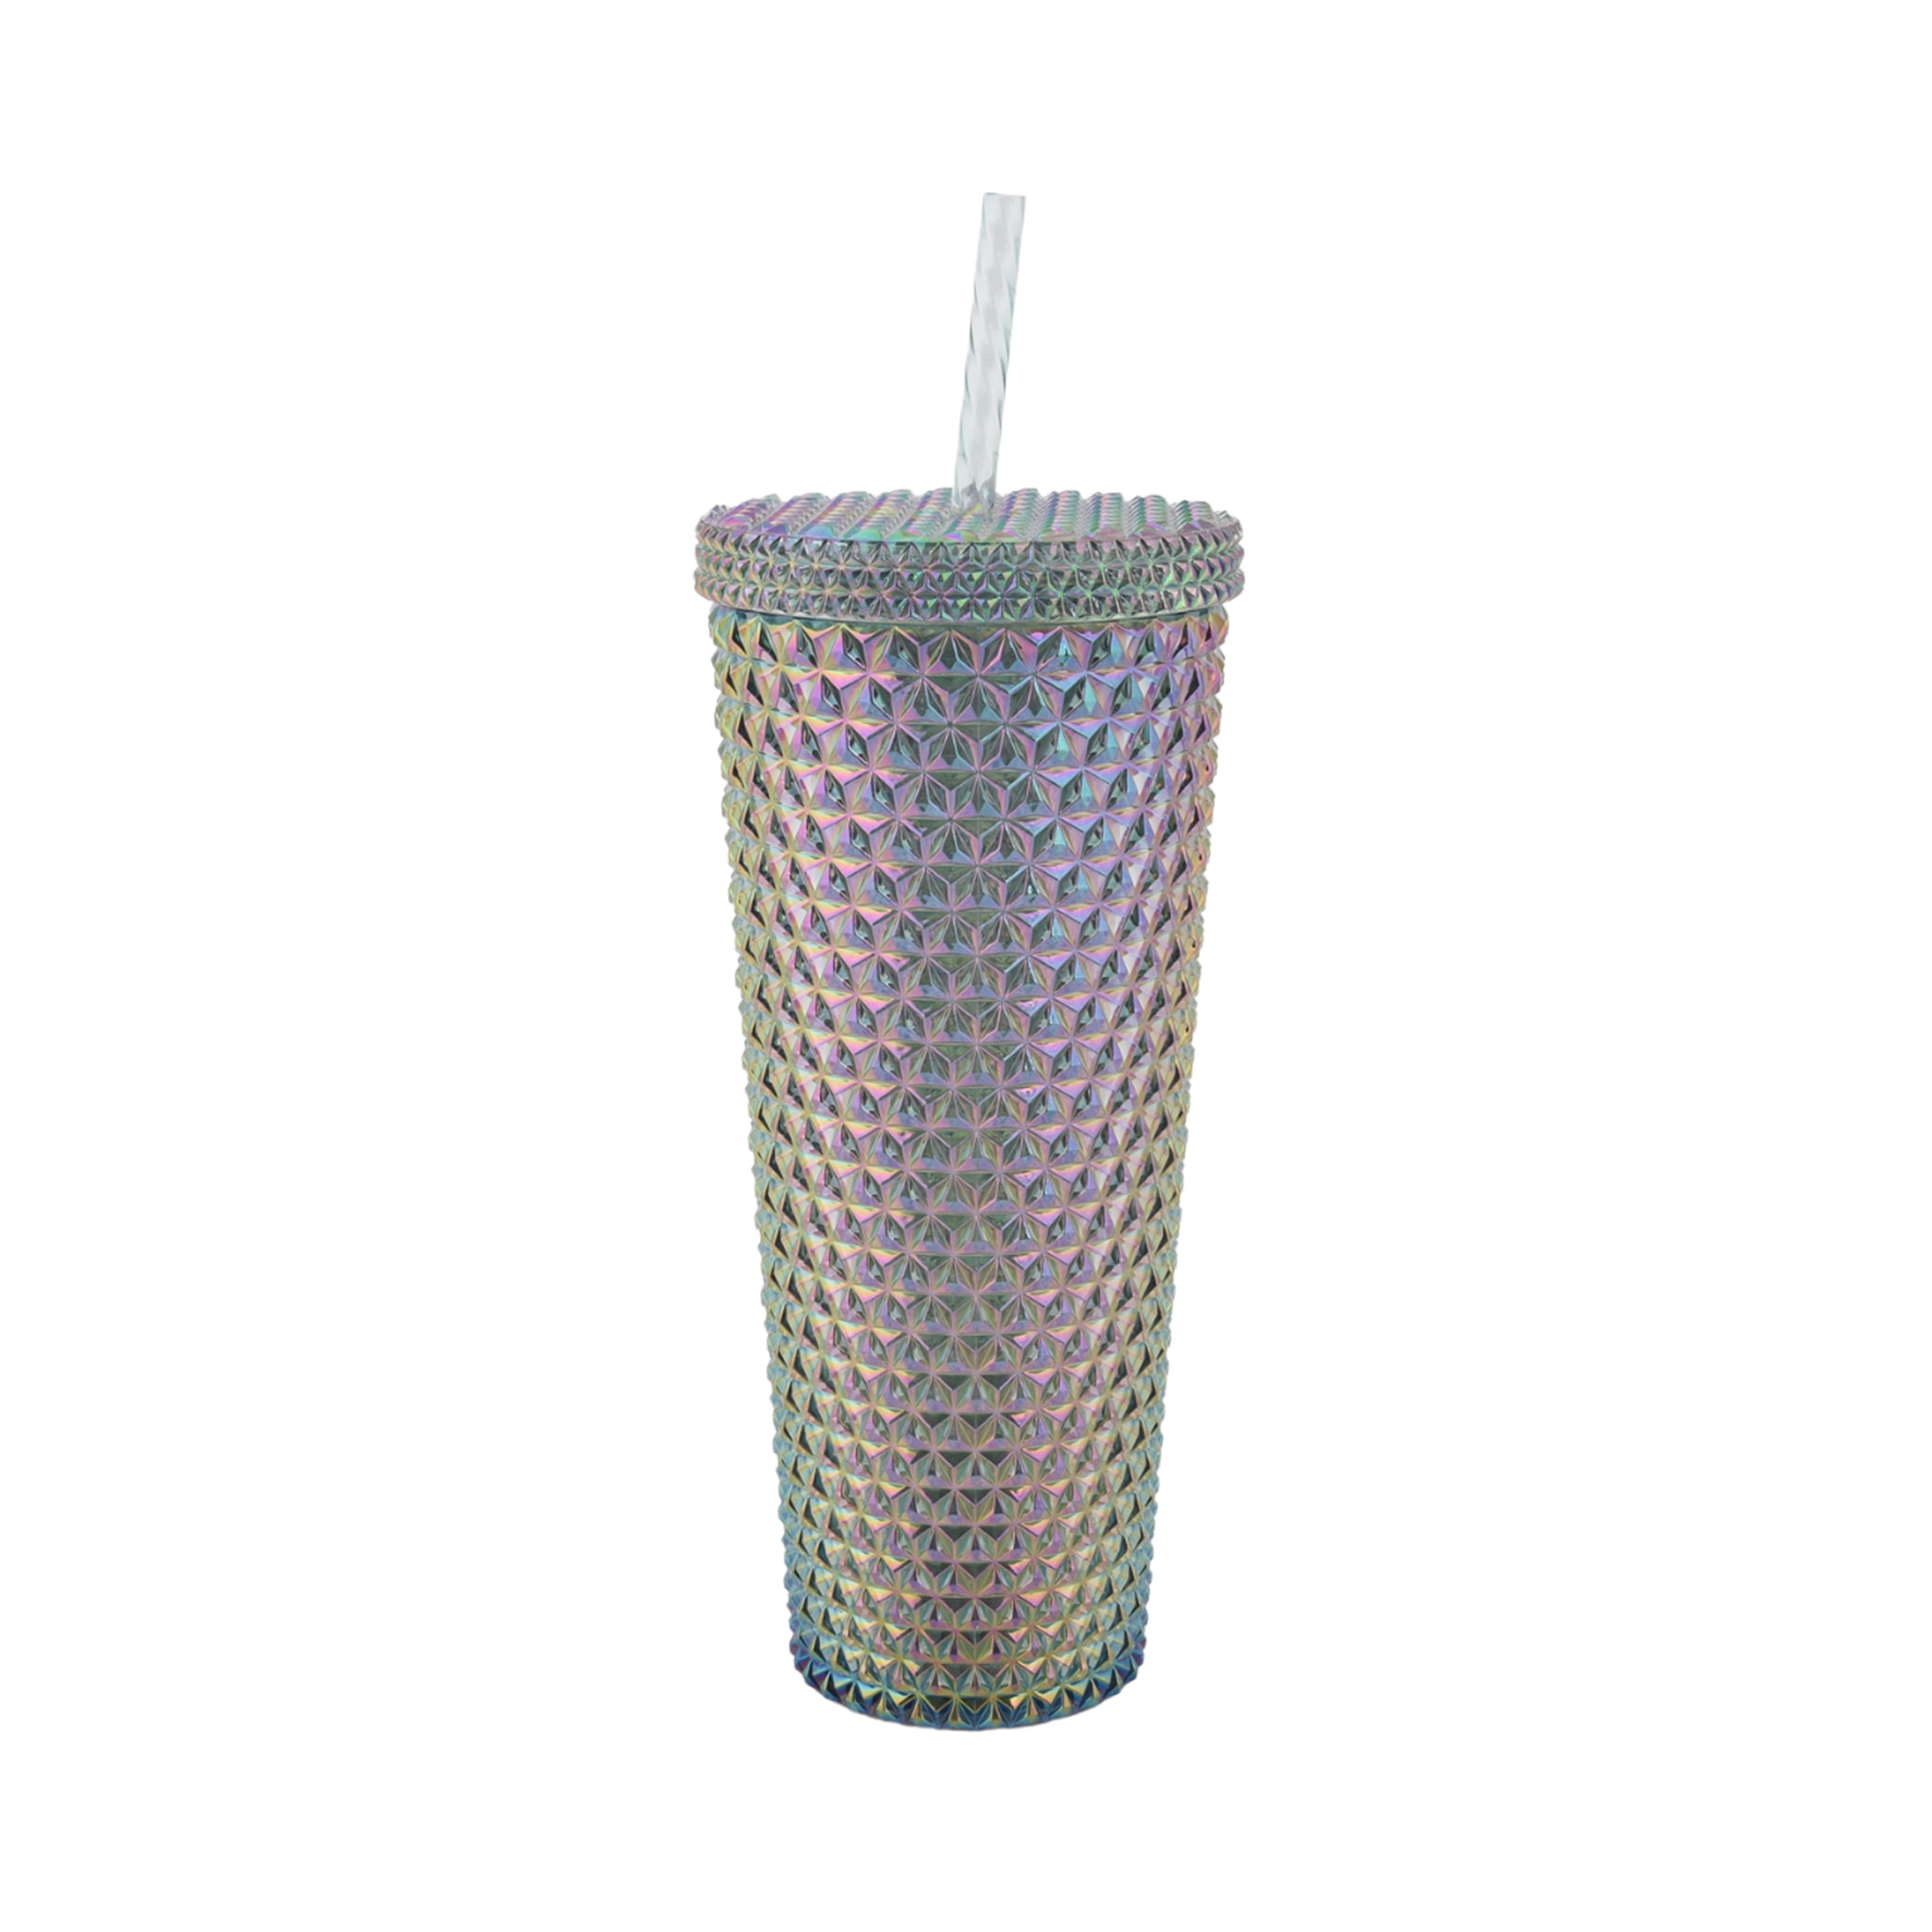 30oz Textured Glitter Stainless Steel Tumbler, Personalized